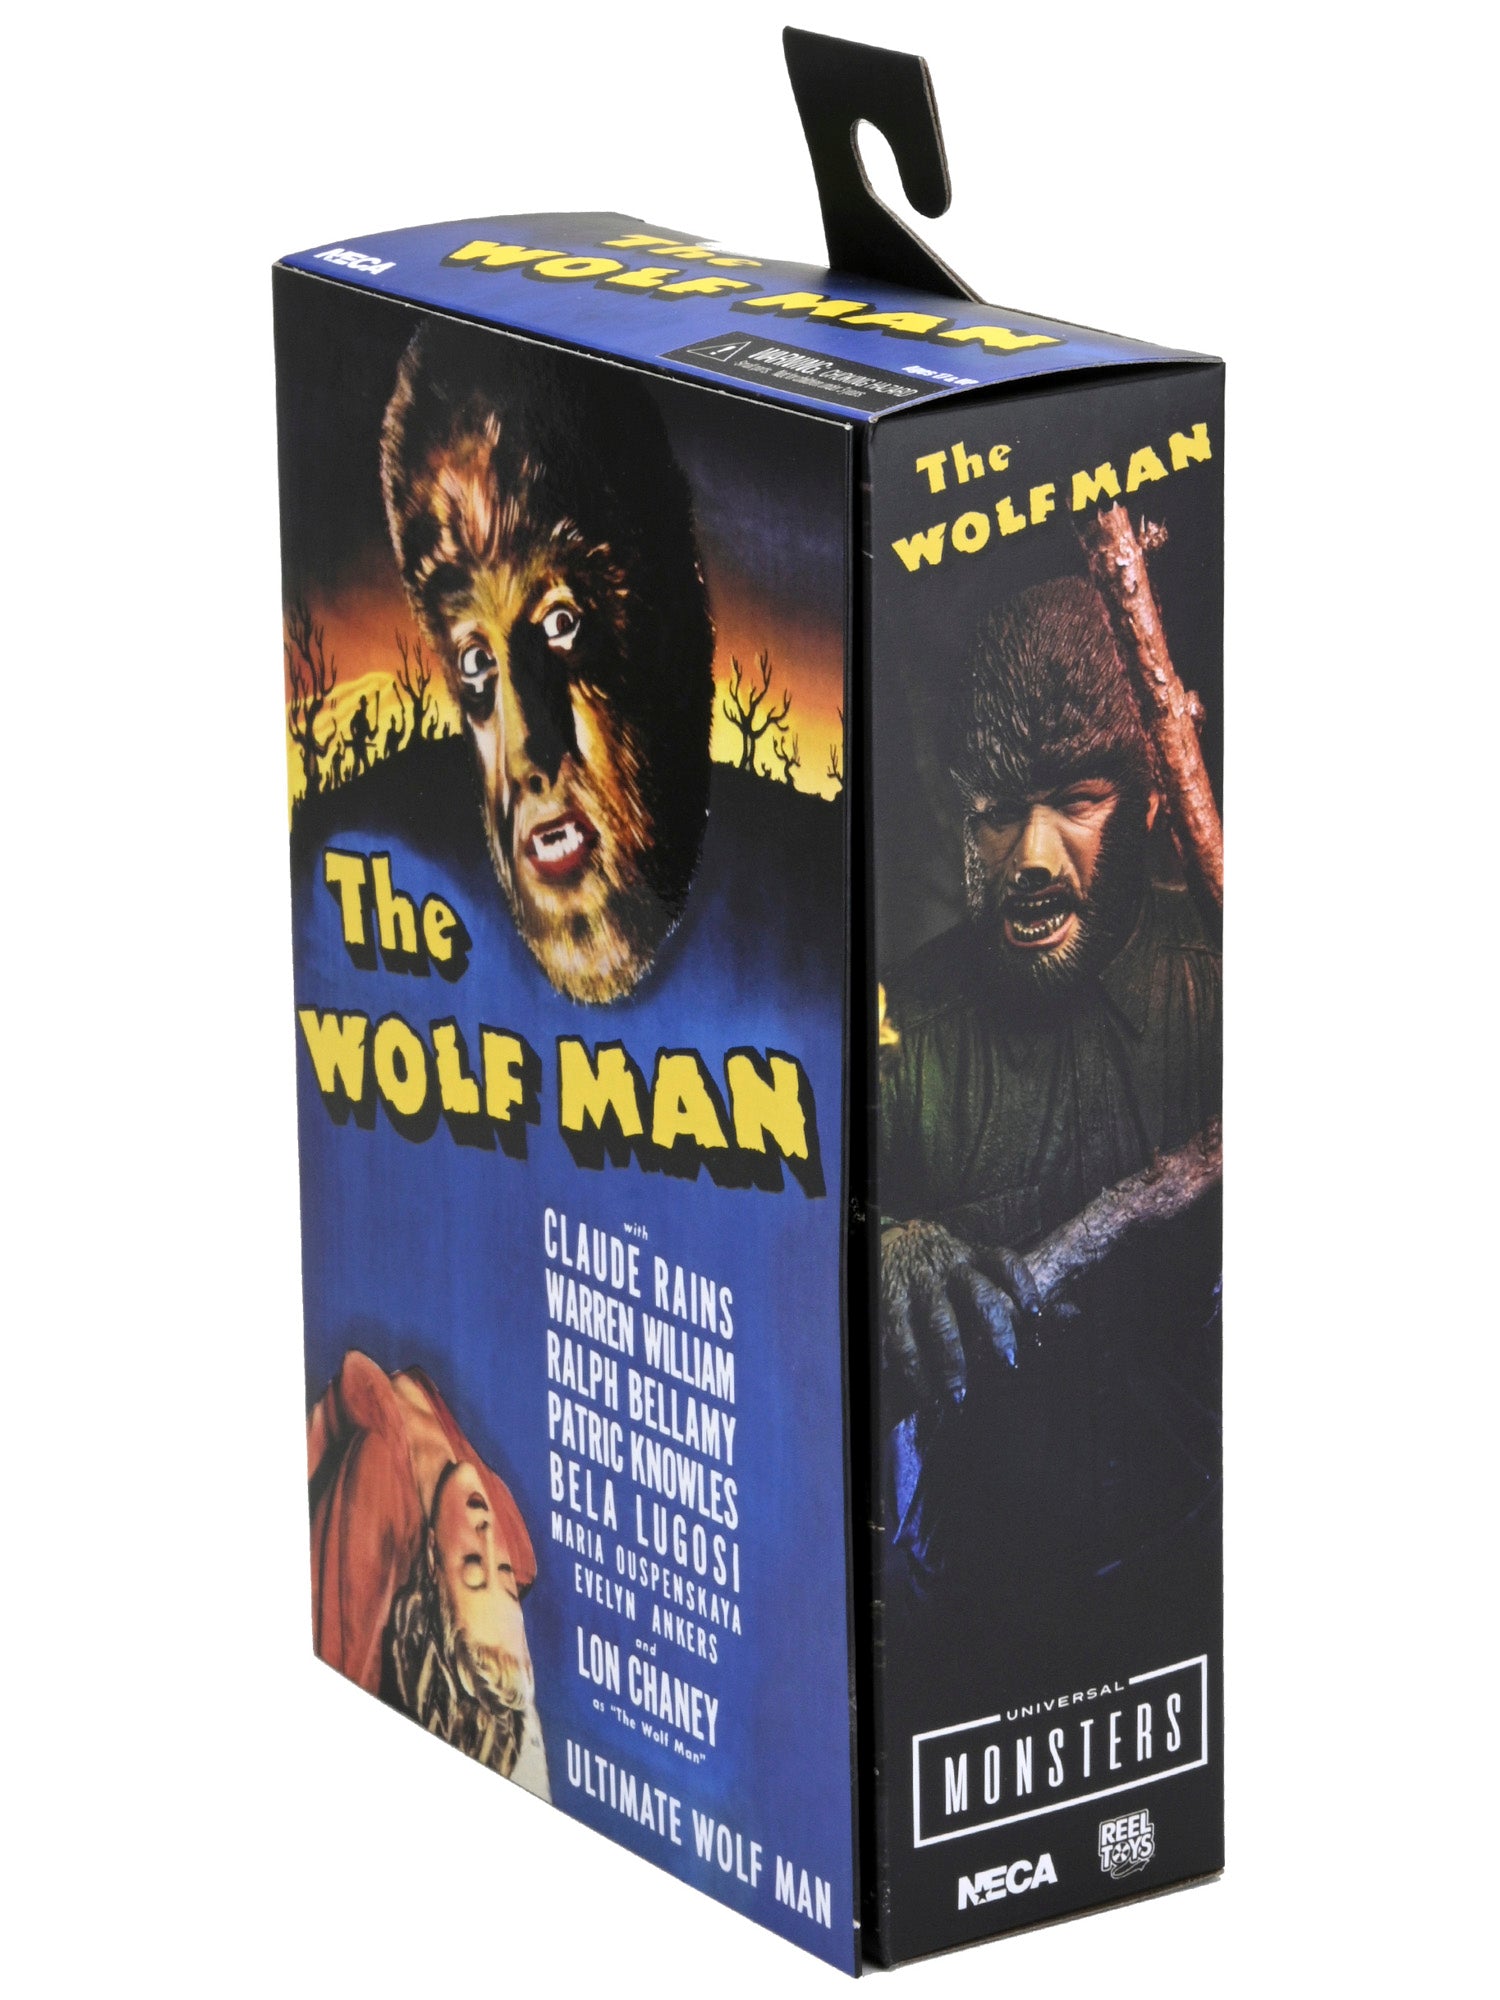 NECA - Universal Monsters - 7" Scale Action Figure - Ultimate Wolf Man (Color) - costumes.com